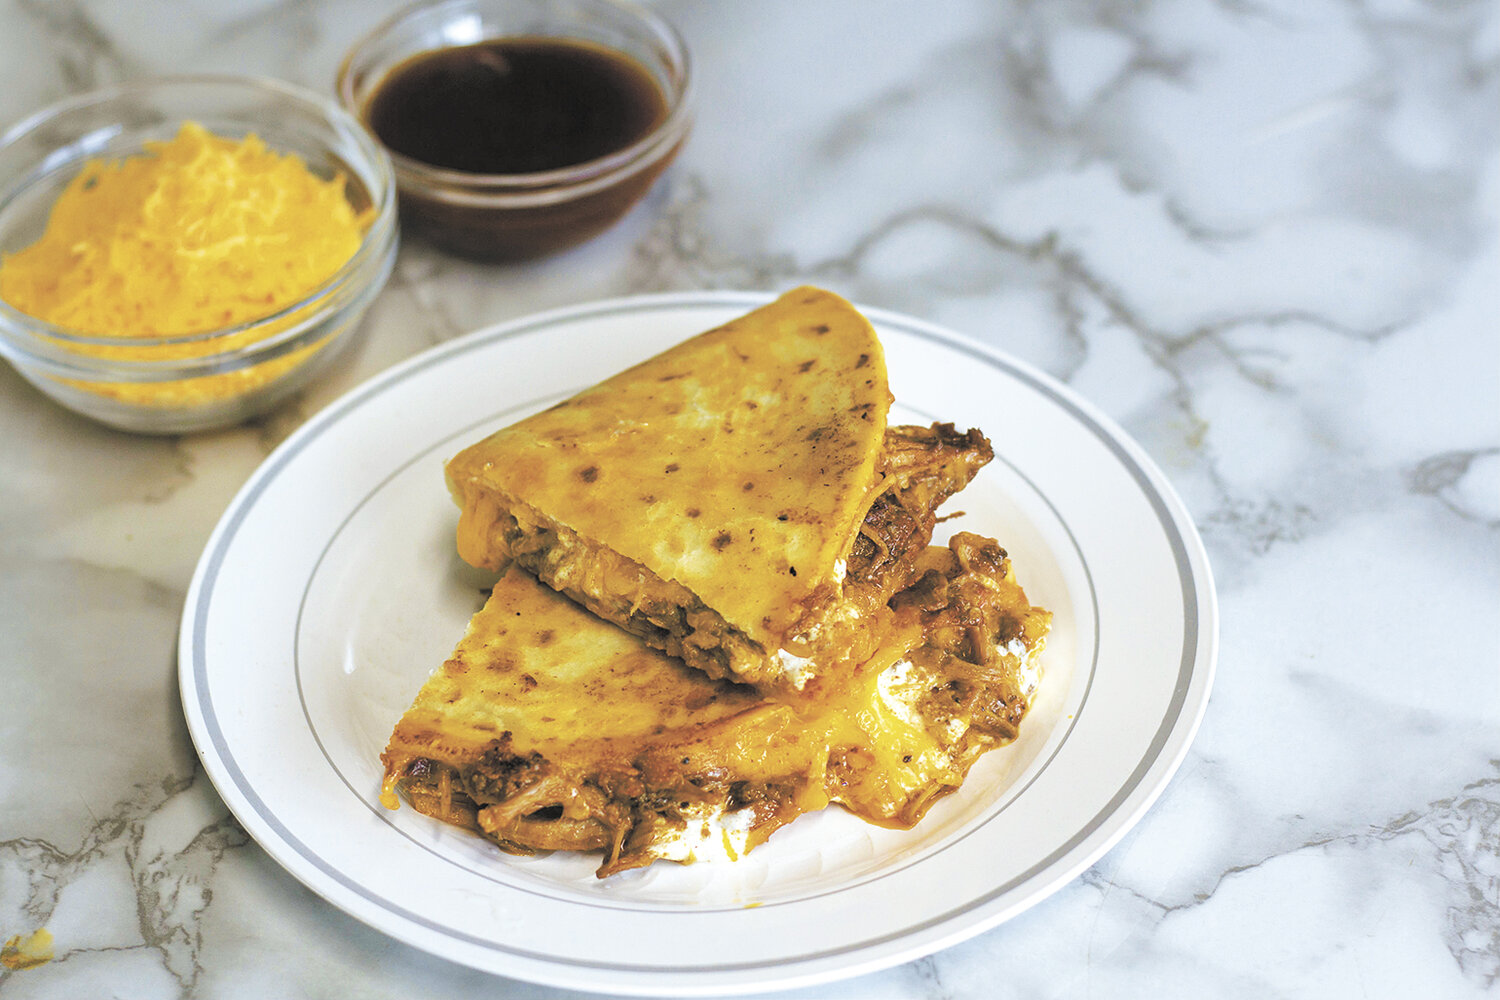 At BittyBean in Bismarck, North Dakota, one of the menu items is a house-smoked pulled pork quesadilla served with sour cream and cheddar cheese. BittyBean uses 30 pounds of various cheese every week.